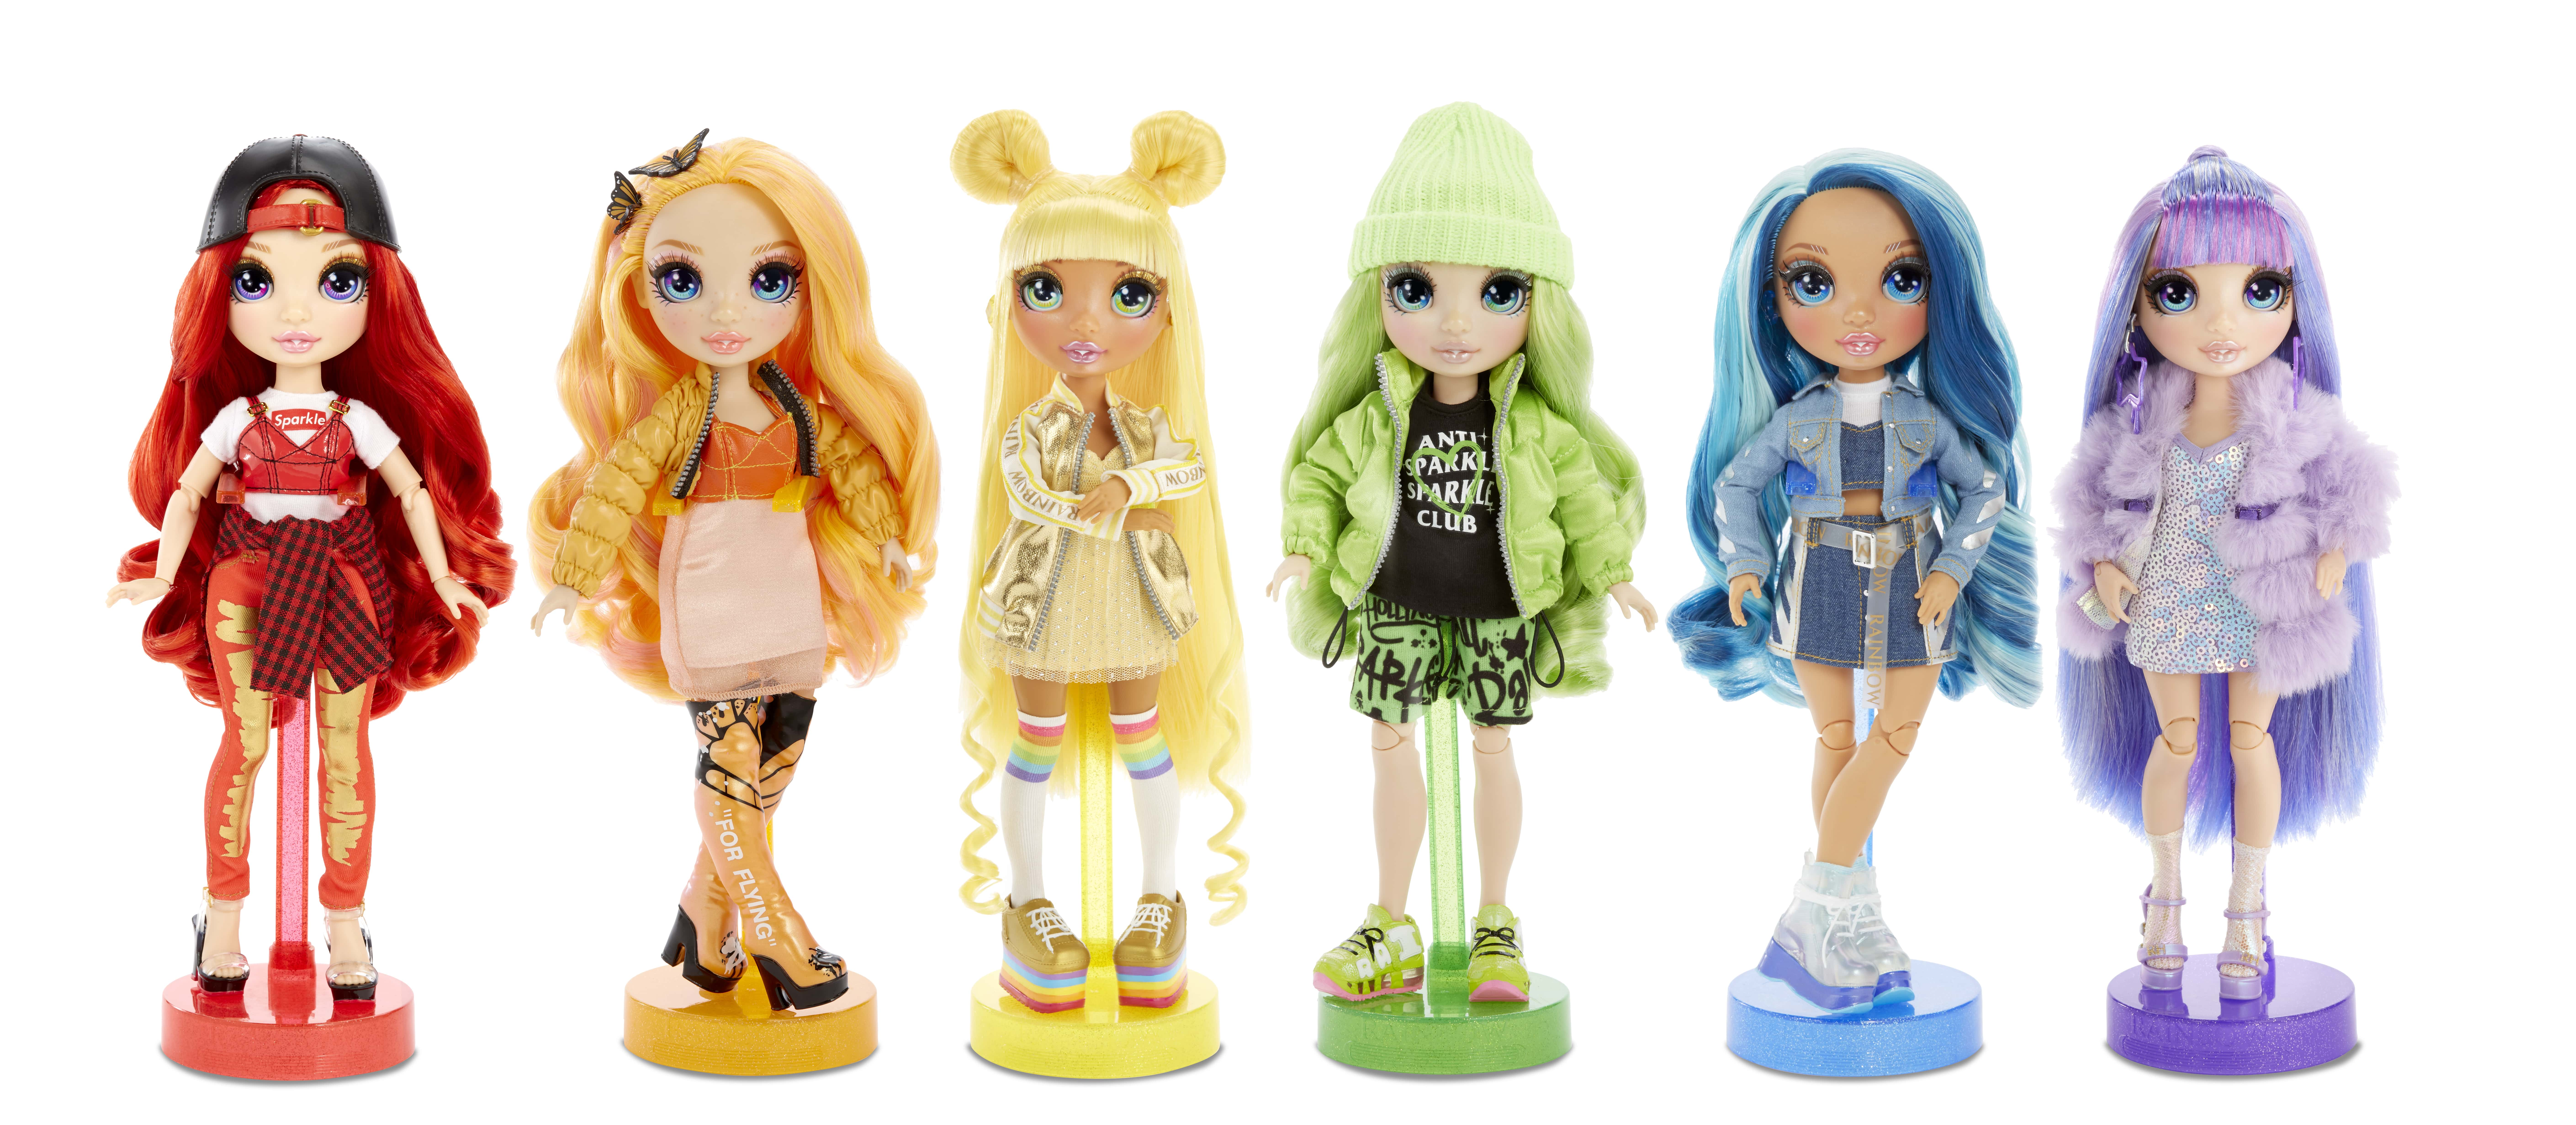 Rainbow High Original Fashion Doll 6-Pack , Violet, Ruby, Sunny, Skyler, Poppy and Jade, 11-inch Poseable Fashion Doll, Includes 6 Outfits, 6 Pairs of Shoes and accessories. Great Gift and Toy for Kid - image 1 of 5